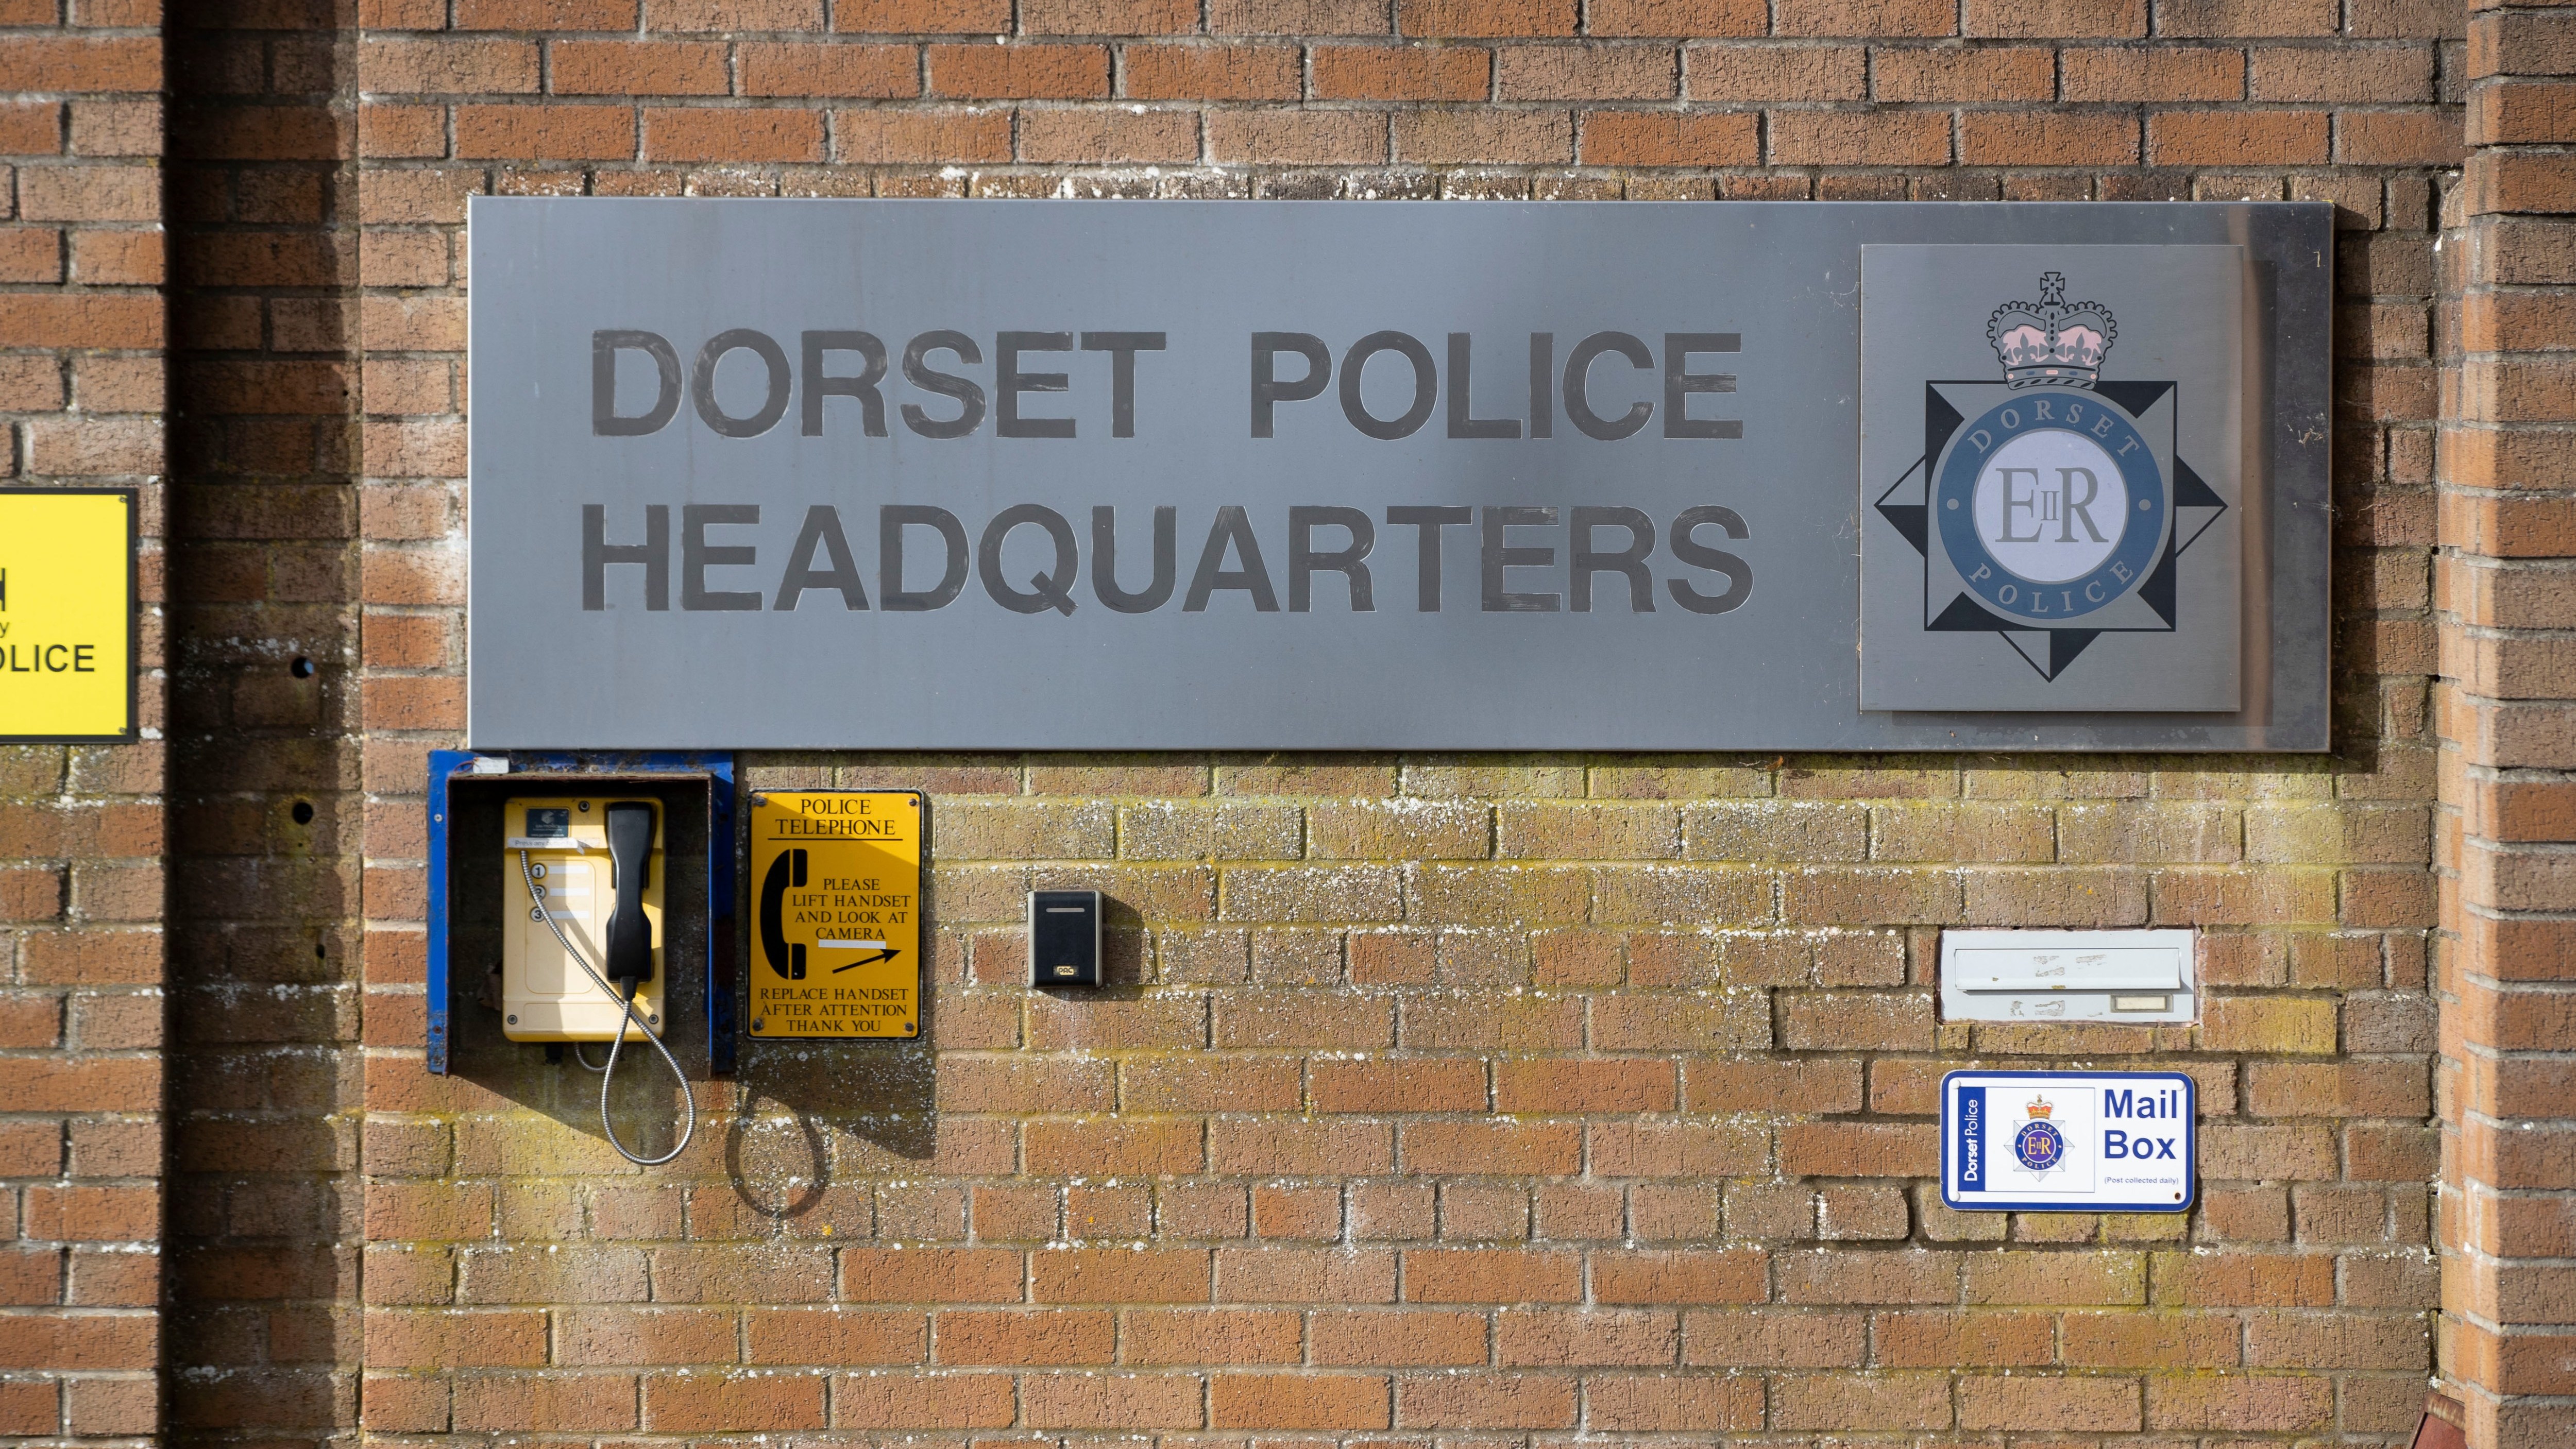 During a fitness test at Dorset police headquarters the instructor Martin Briggs is alleged to have used bolt cutters to remove trainees’ jewellery